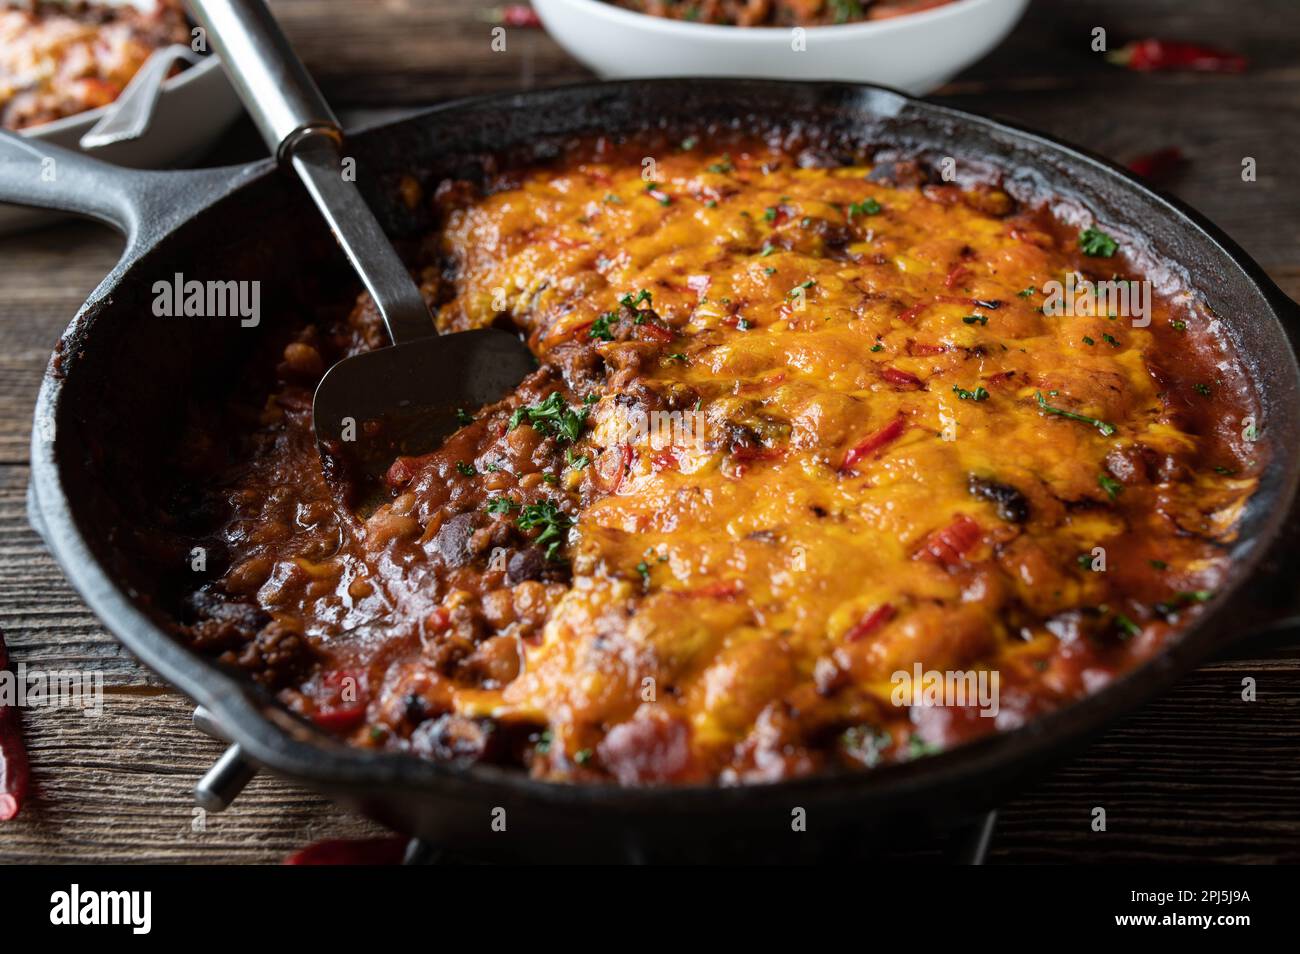 Tex mex stew with beans, ground beef, vegetables and cheddar cheese topping. Stock Photo